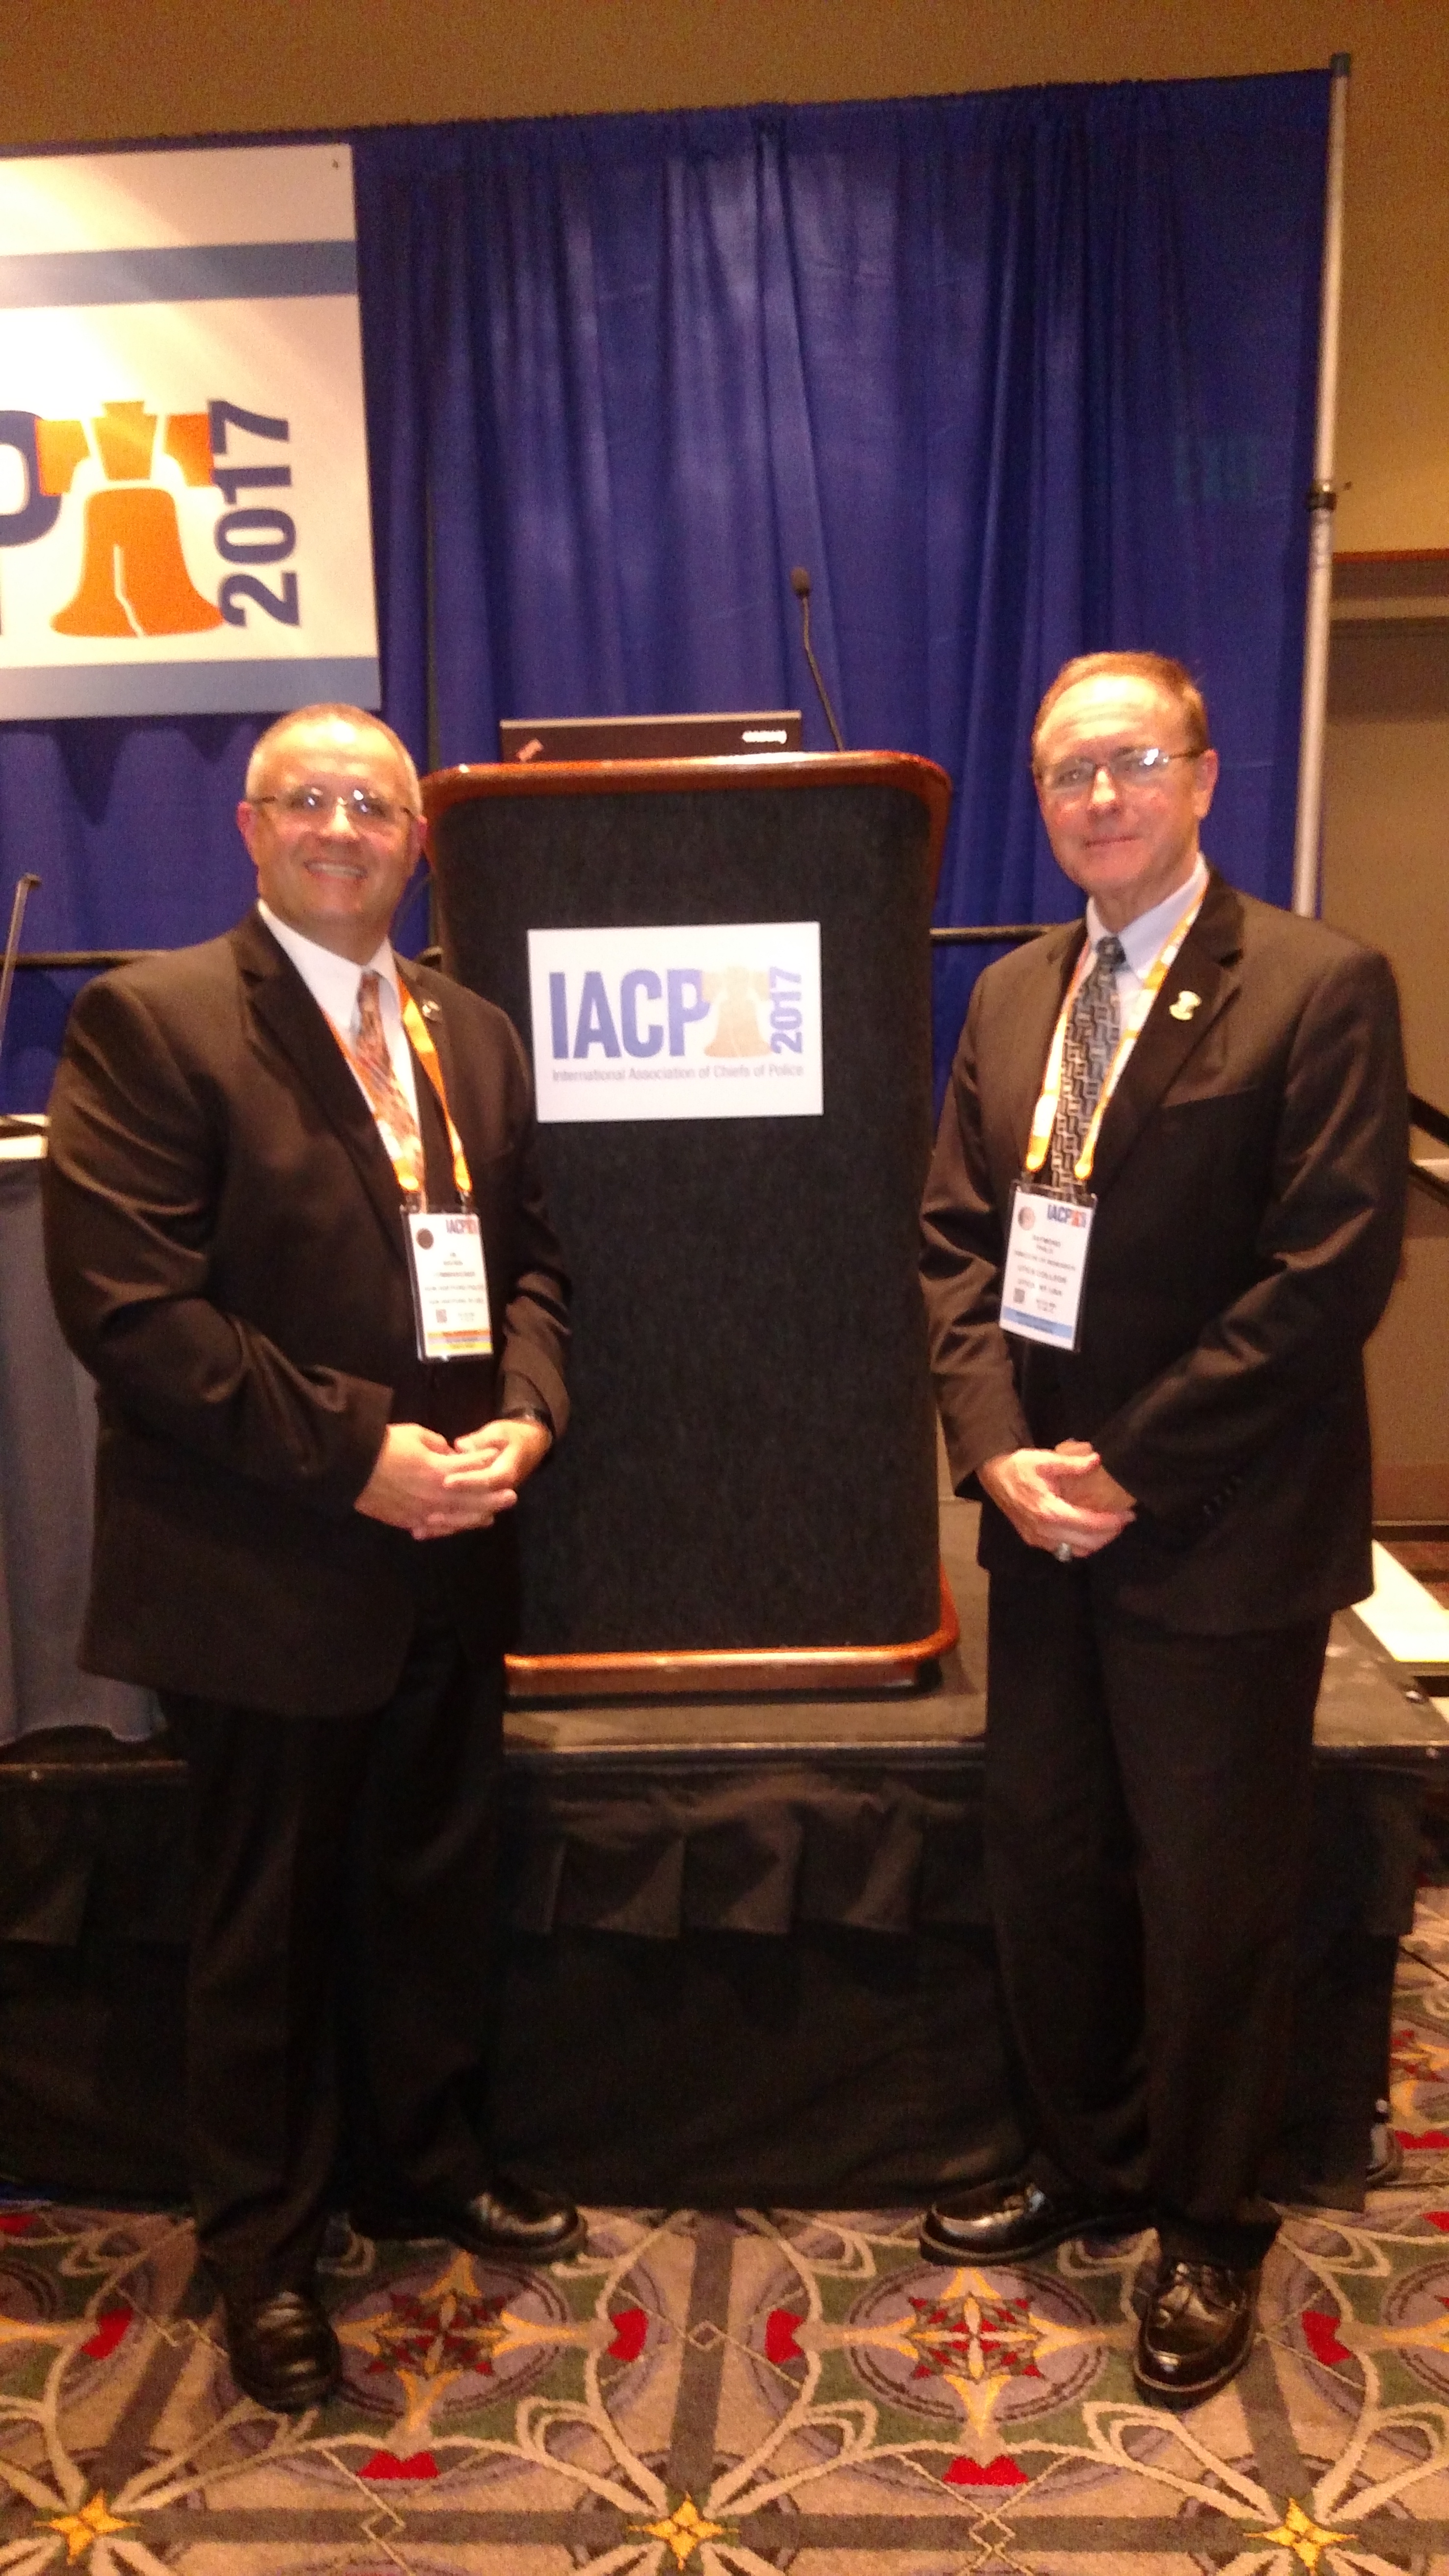 Dr. Brown and Professor Philo at the IACP Conference, October 2017